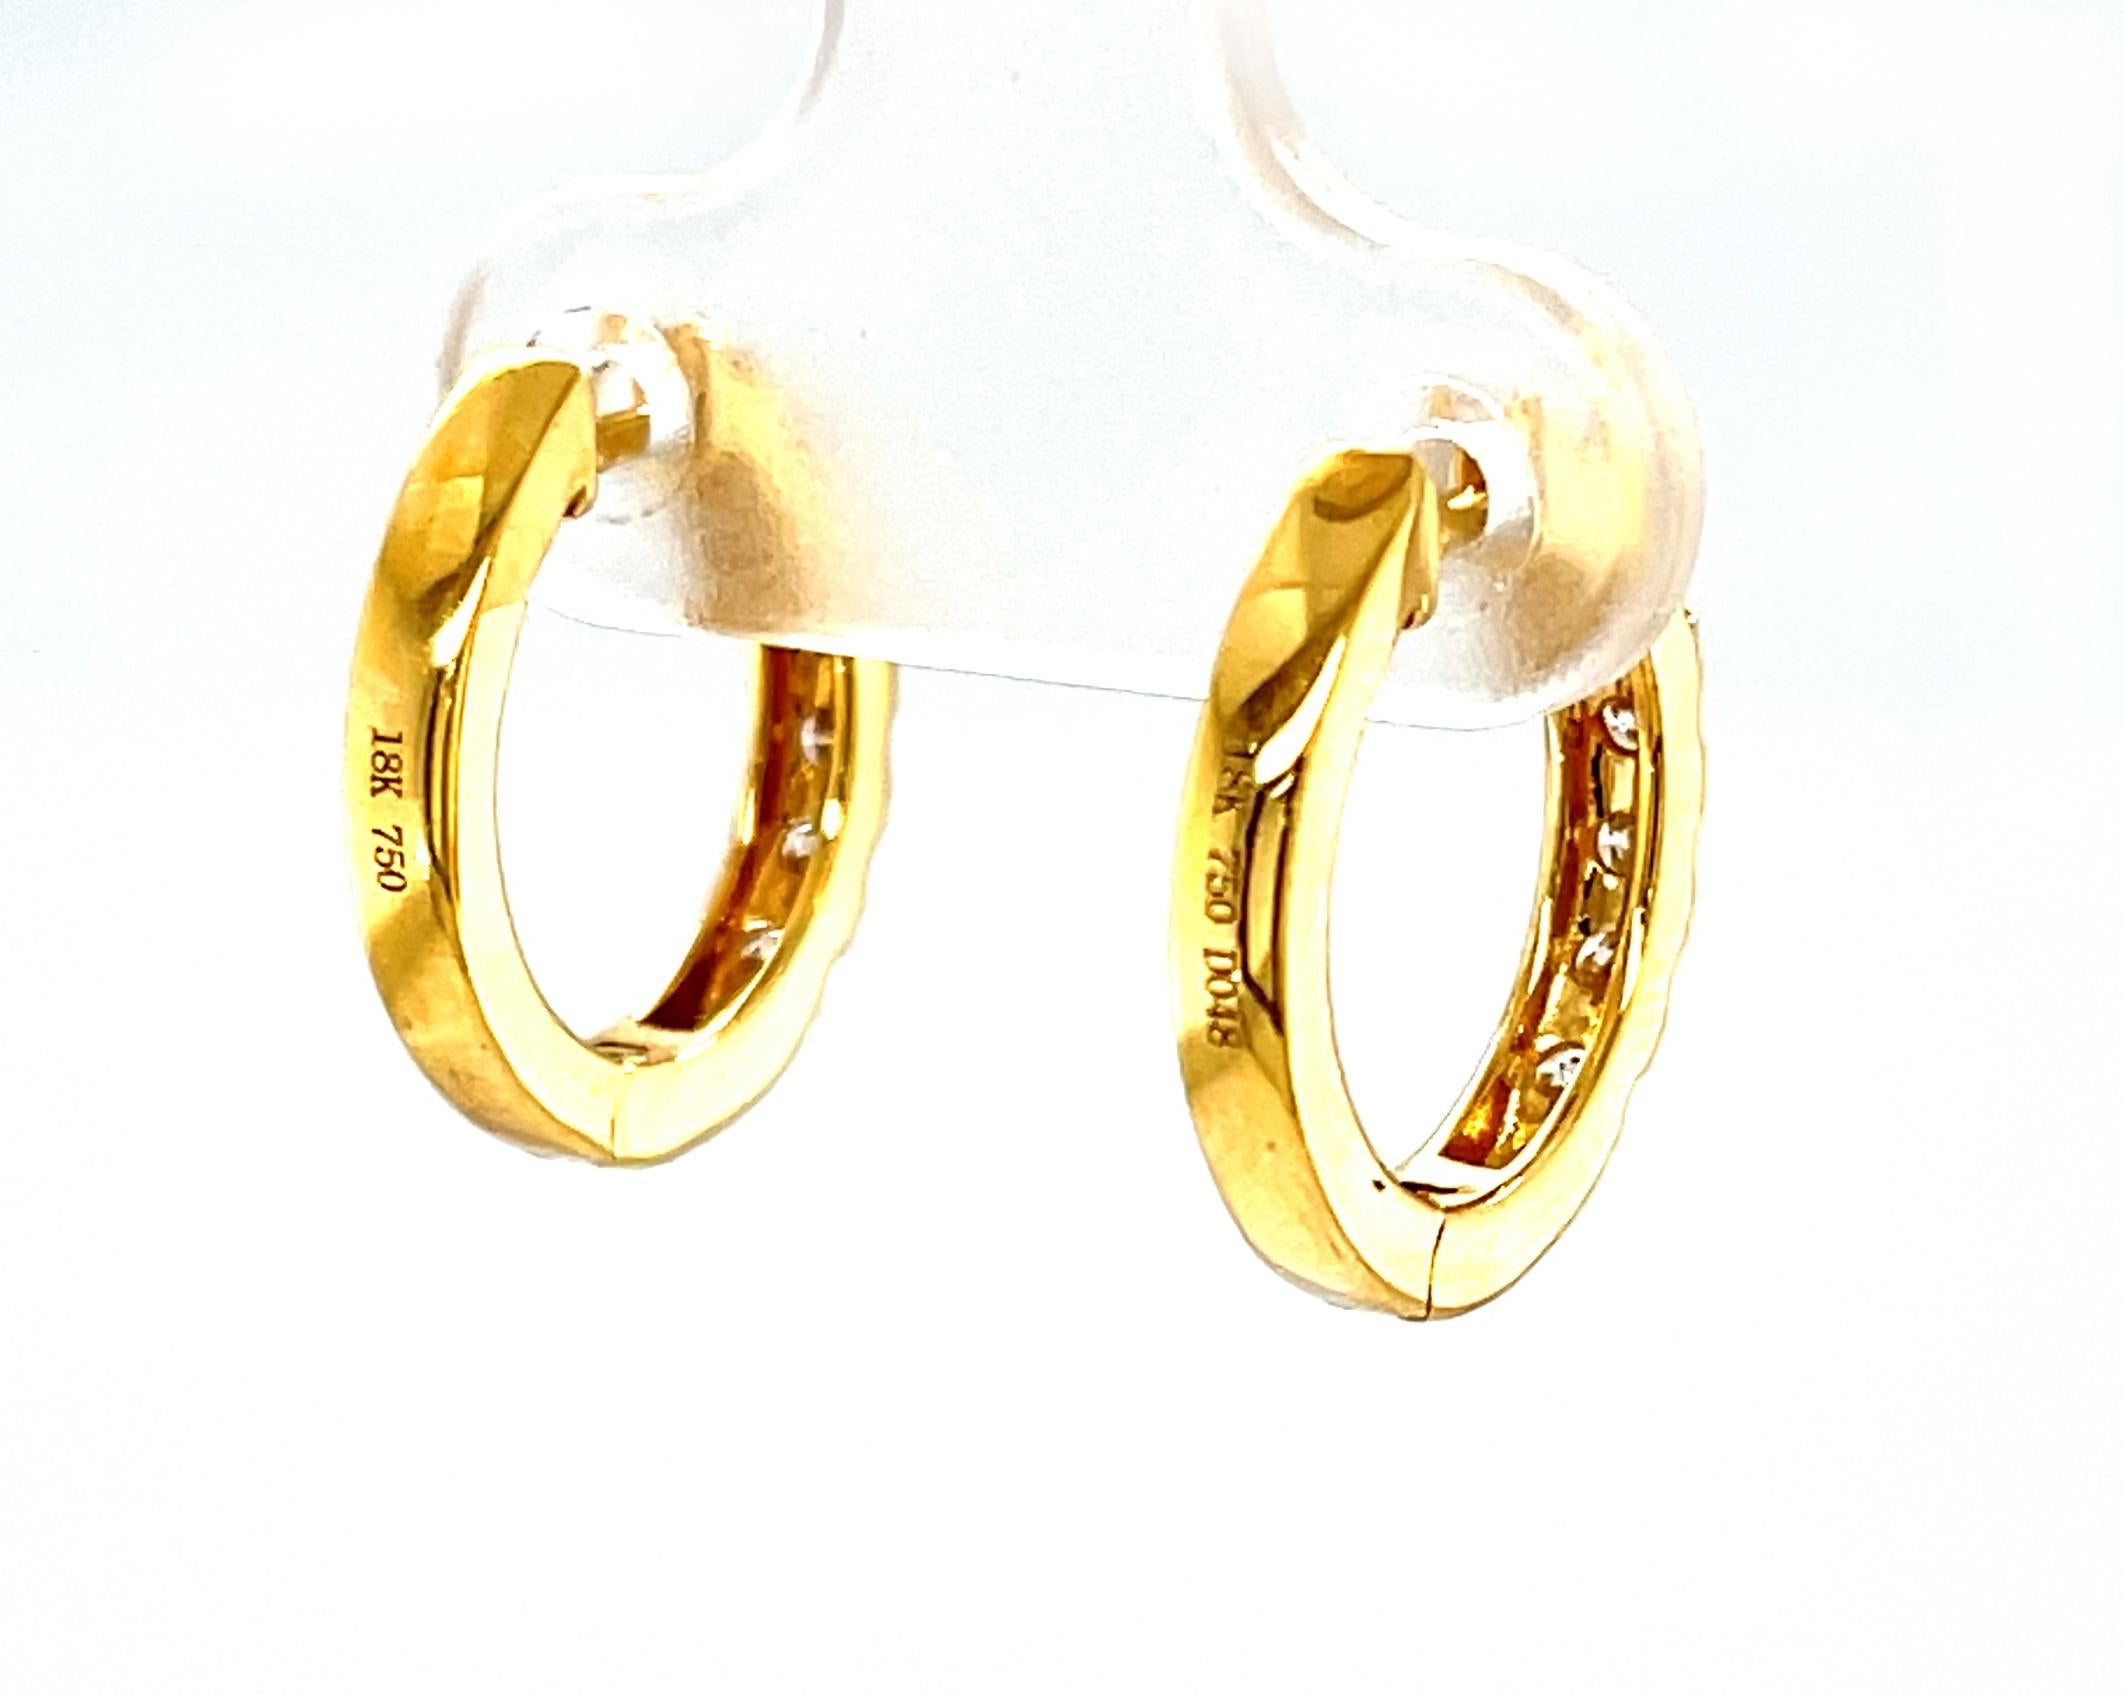 Round Cut Diamond Hoop Earrings in 18k Yellow Gold with Hinged Backs, .48 Carats Total For Sale